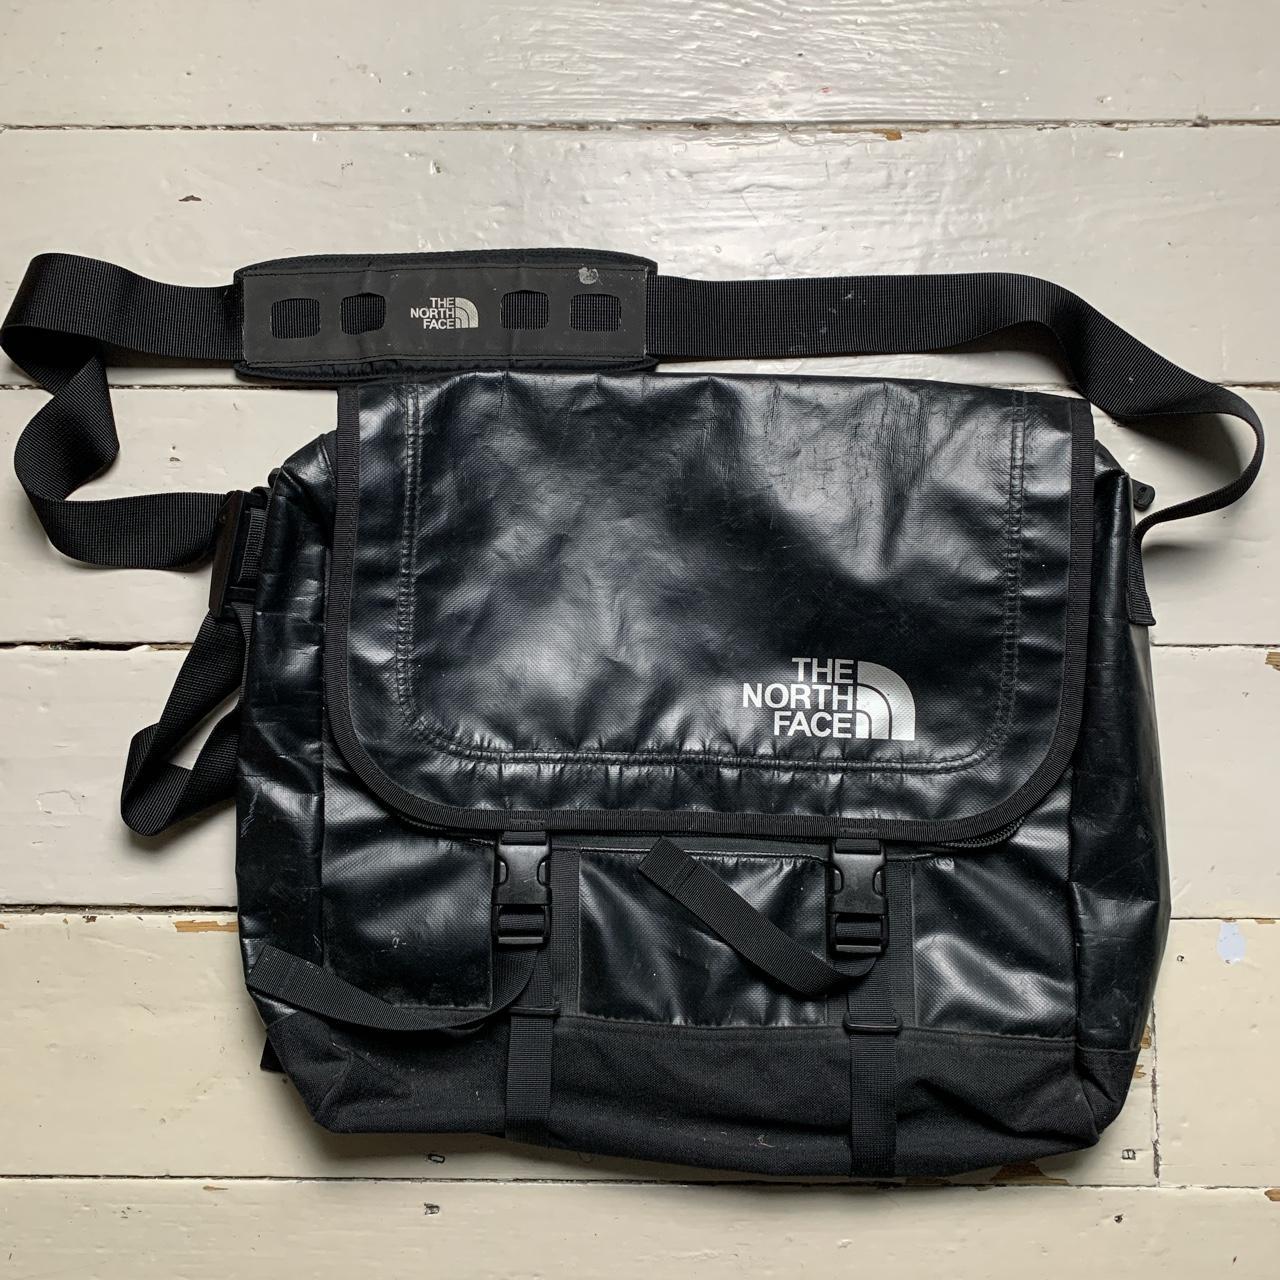 The North Face Messenger Side Bag Black and White